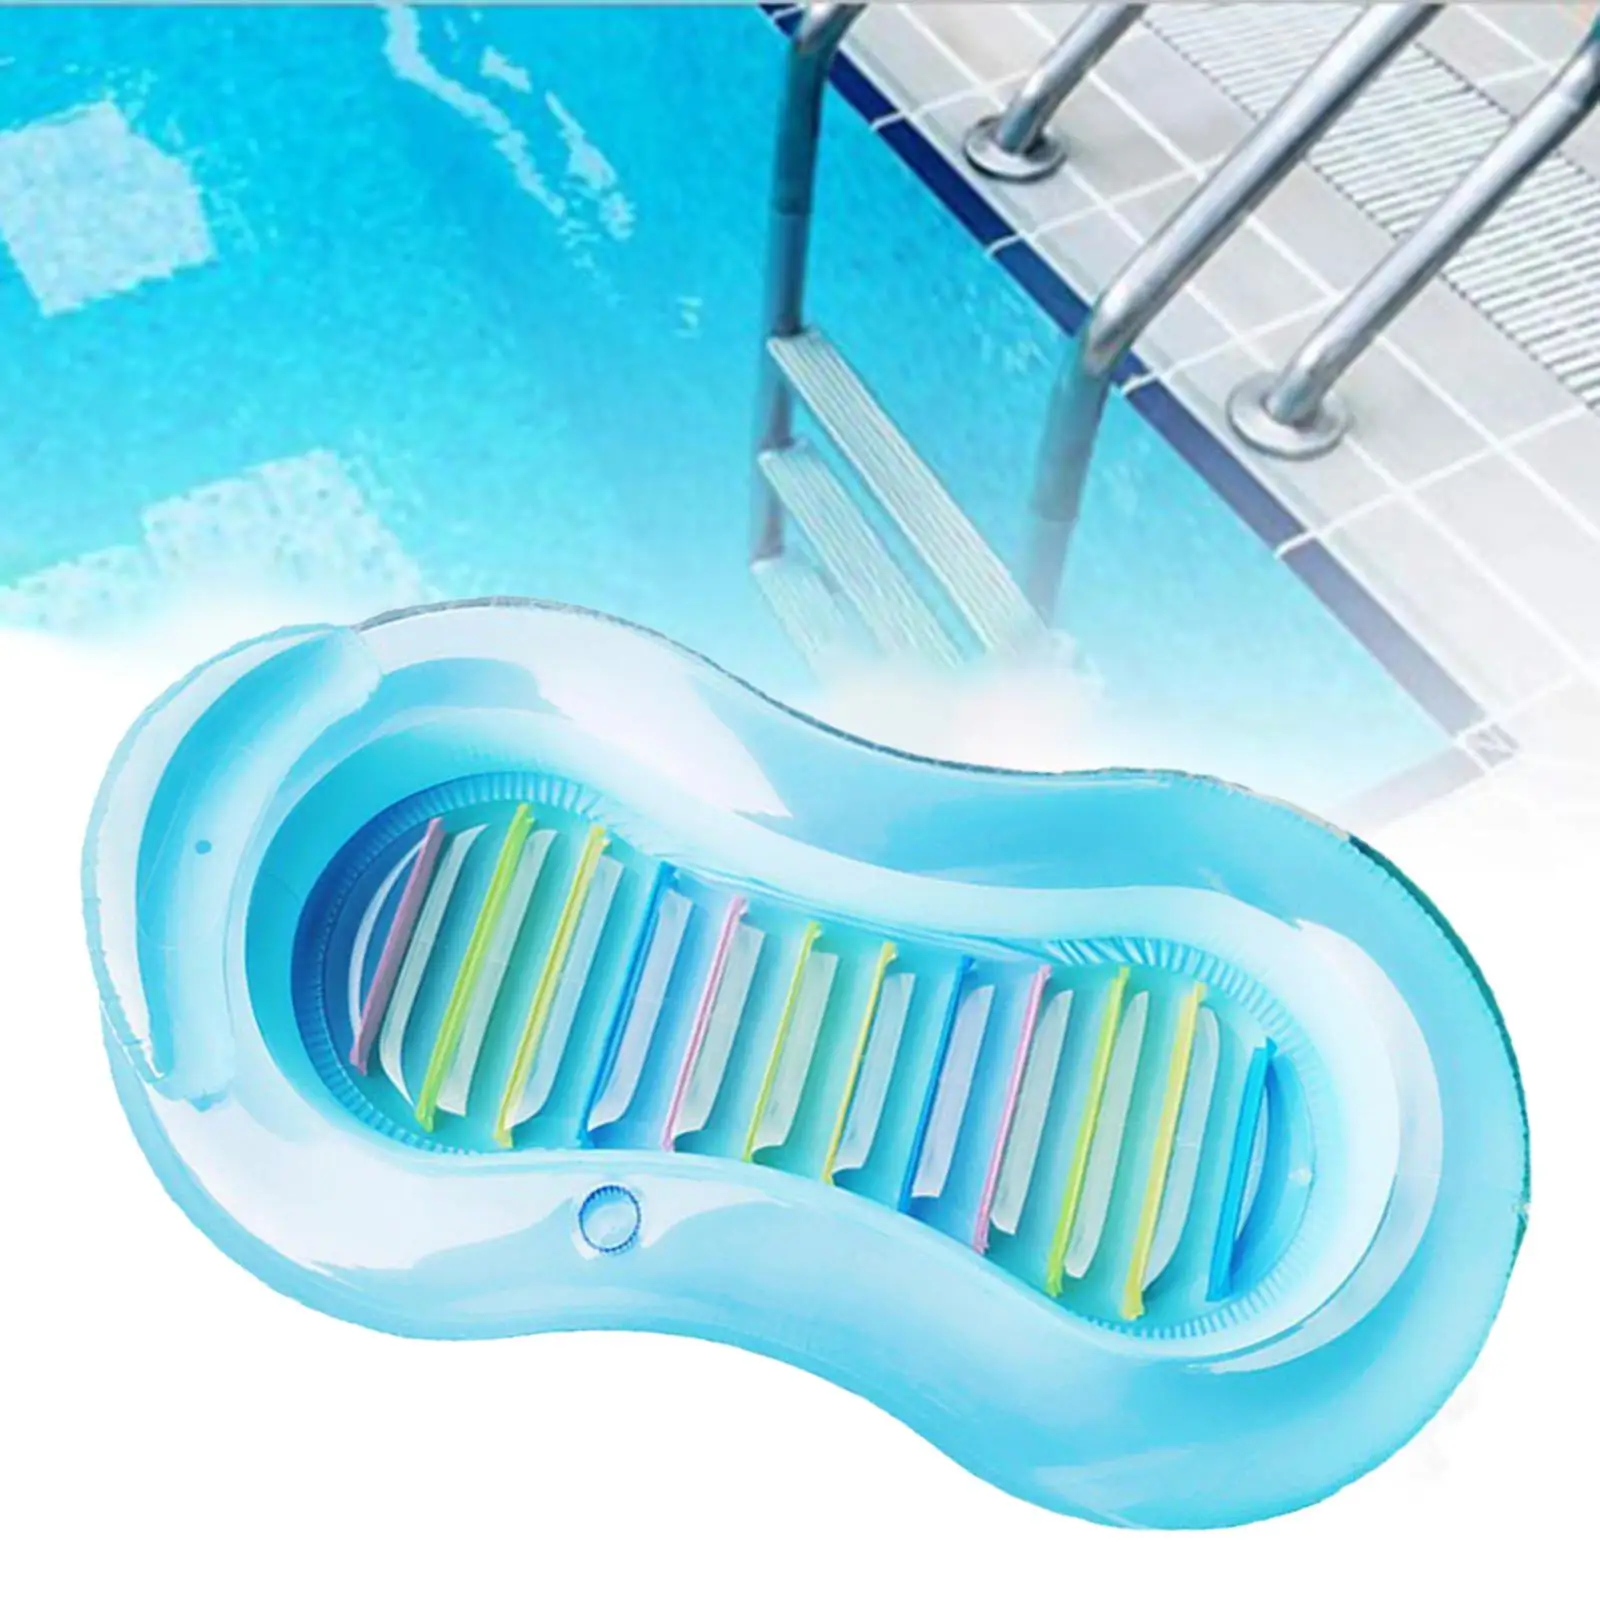 PVC Inflatable Floats Pool Floats Lounge Water Mattress Mat Floating Rafts Inflatable Hammock for Beach